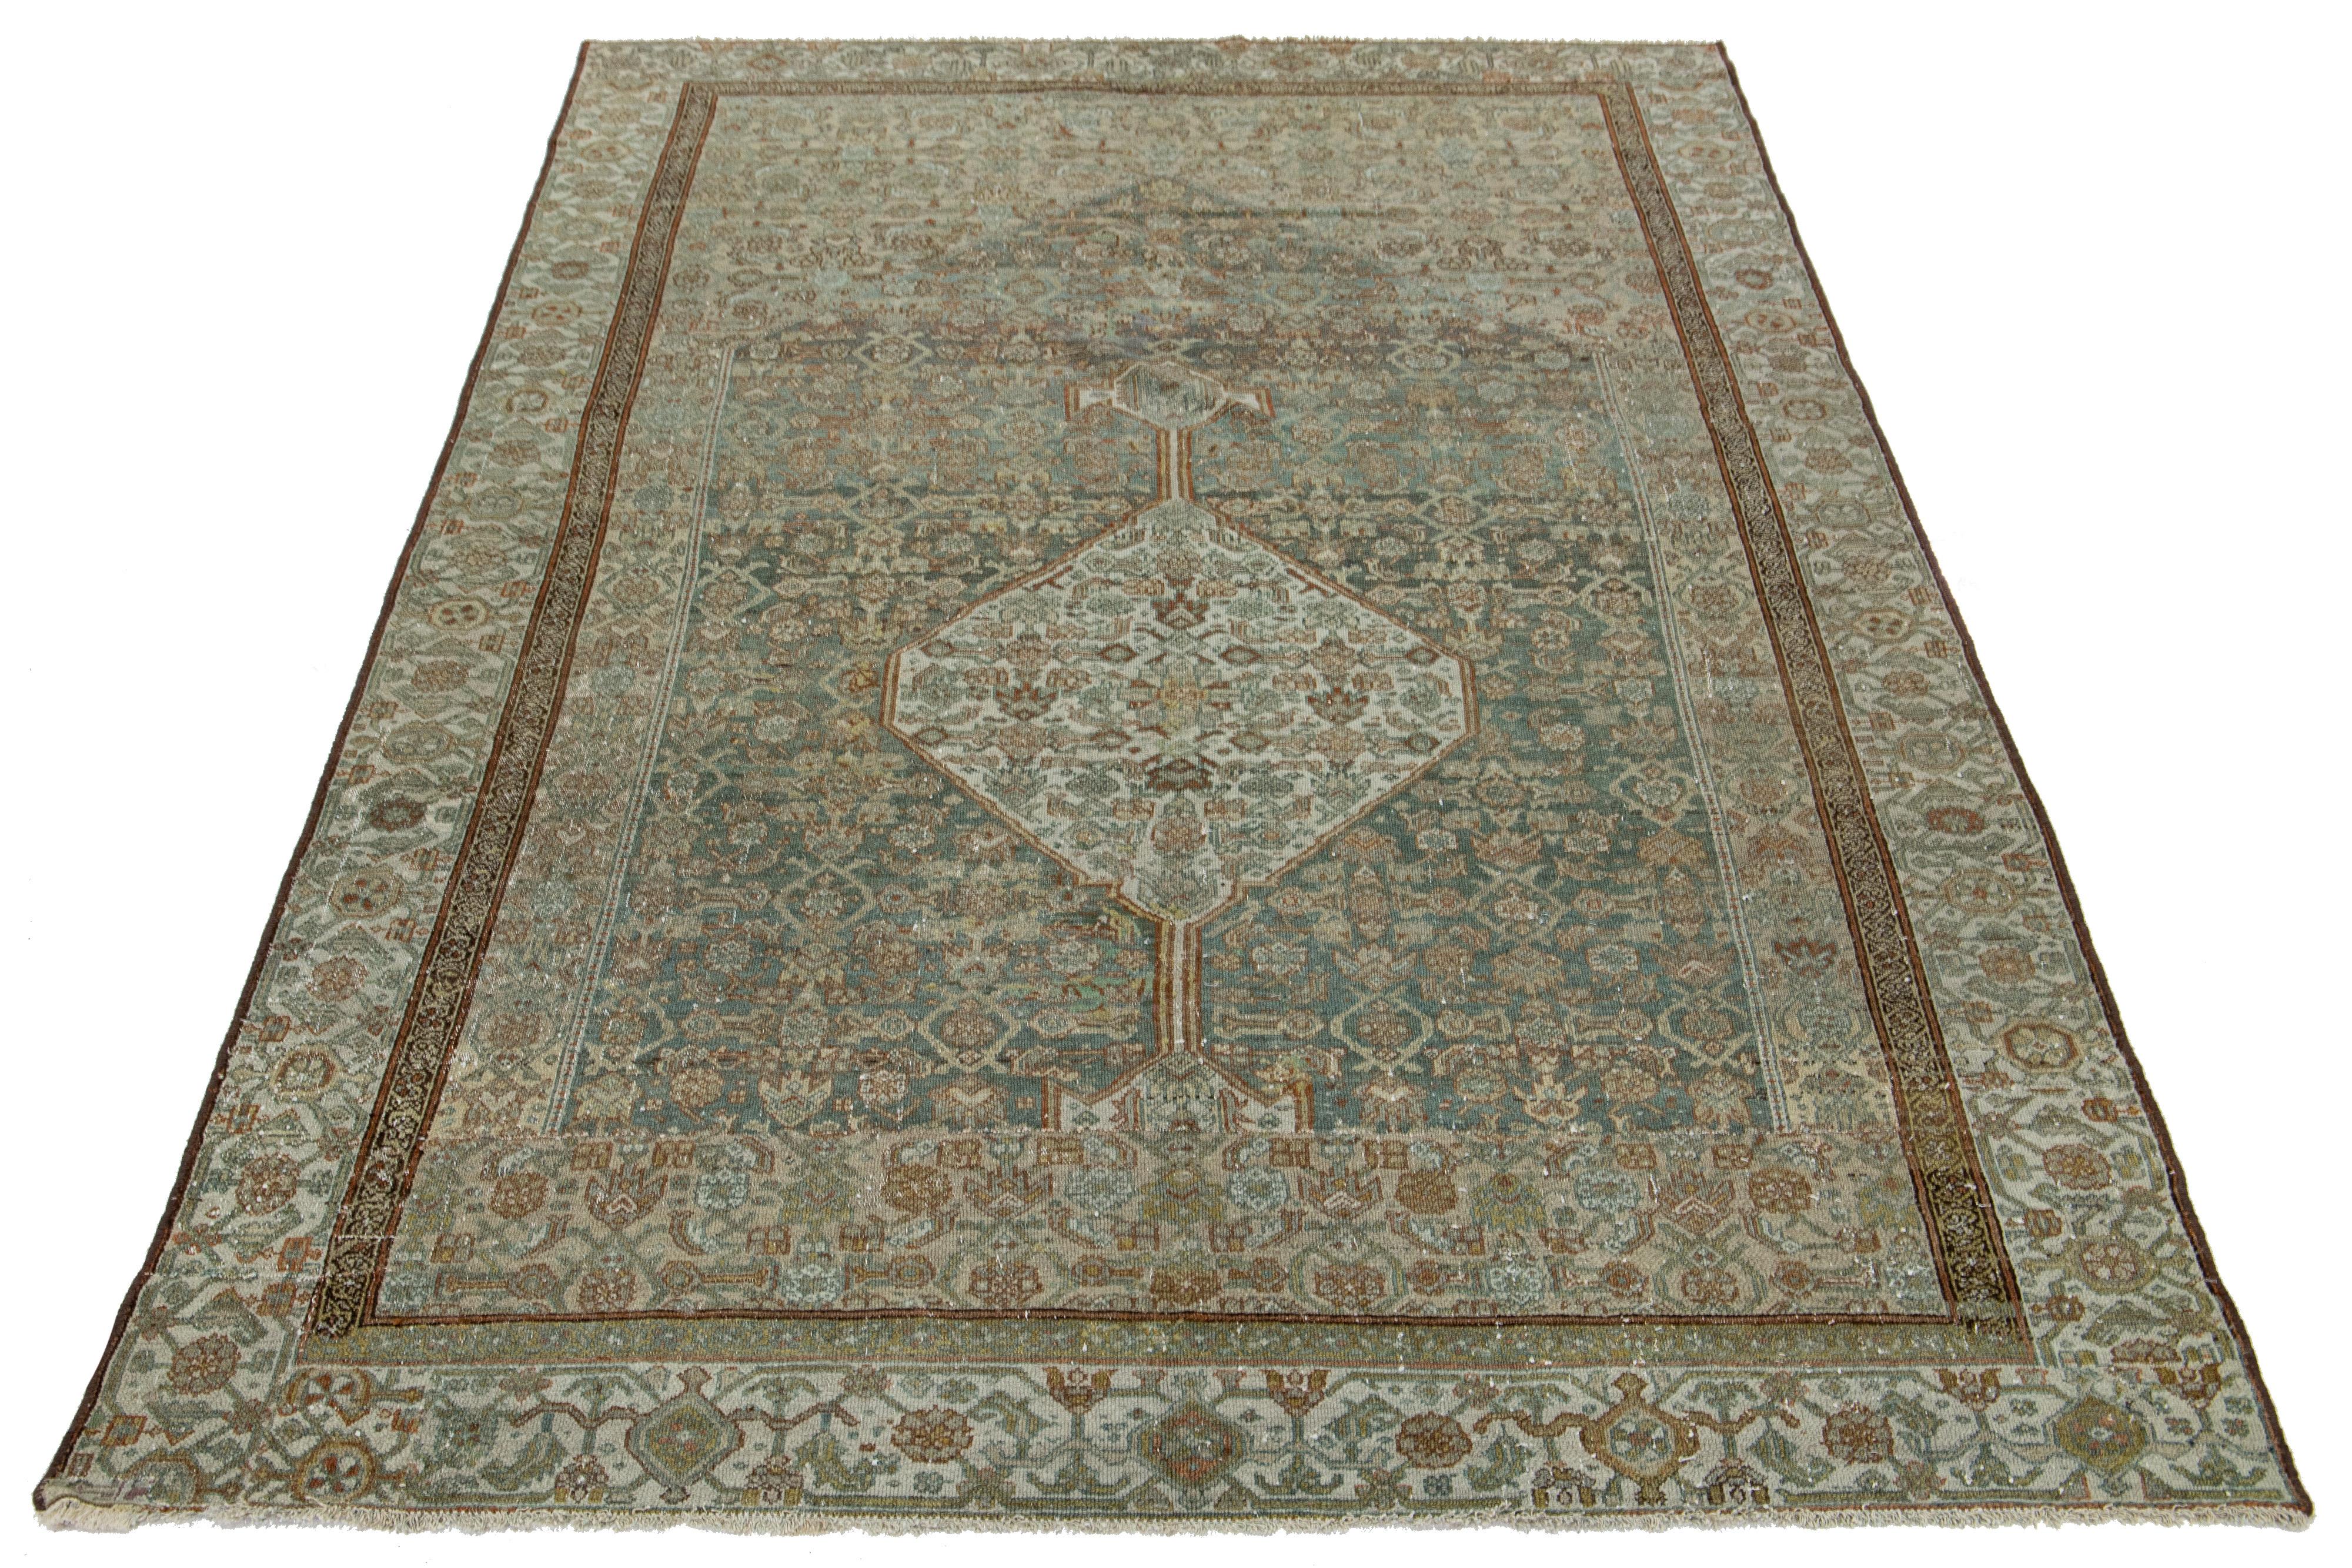 Beautiful antique Bibikabad hand-knotted wool rug with a blue field. This piece has a designed frame with beige and brown accent colors on a gorgeous all-over classic floral design.

This rug measures 6' x 10'.
  